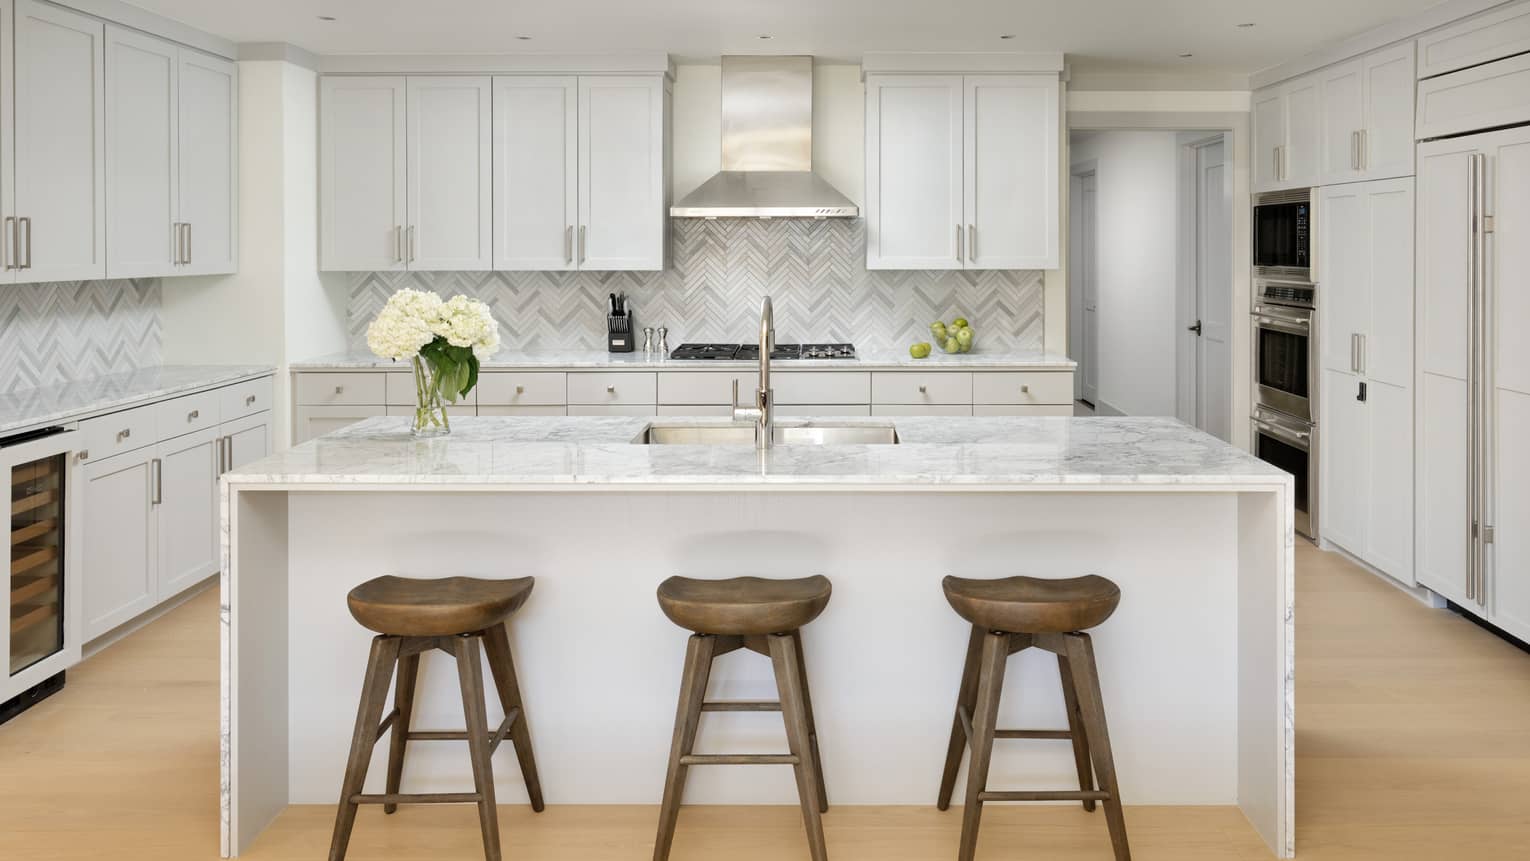 three natural wooden stools are set up next to a white marble topped island in a very neutral kitchen